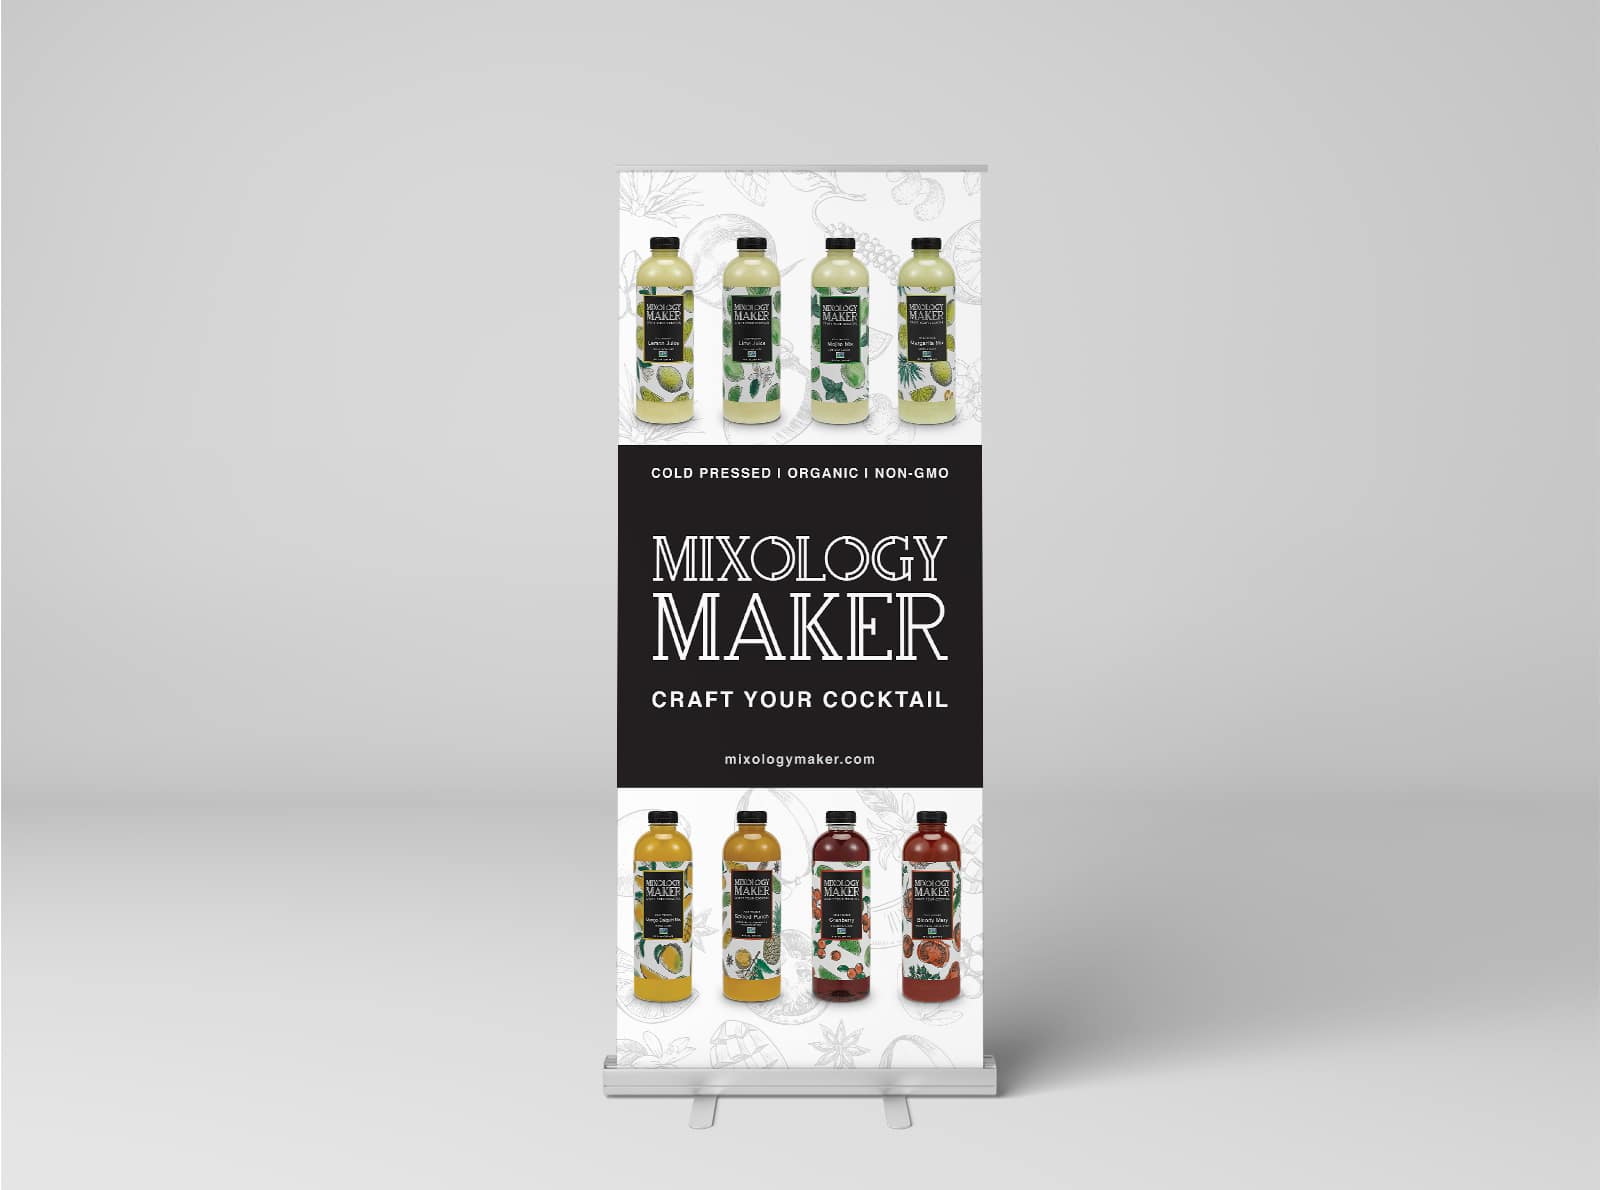 Mixology Maker banner design with black-and-white banded logo in the center and products lining the top and bottom.